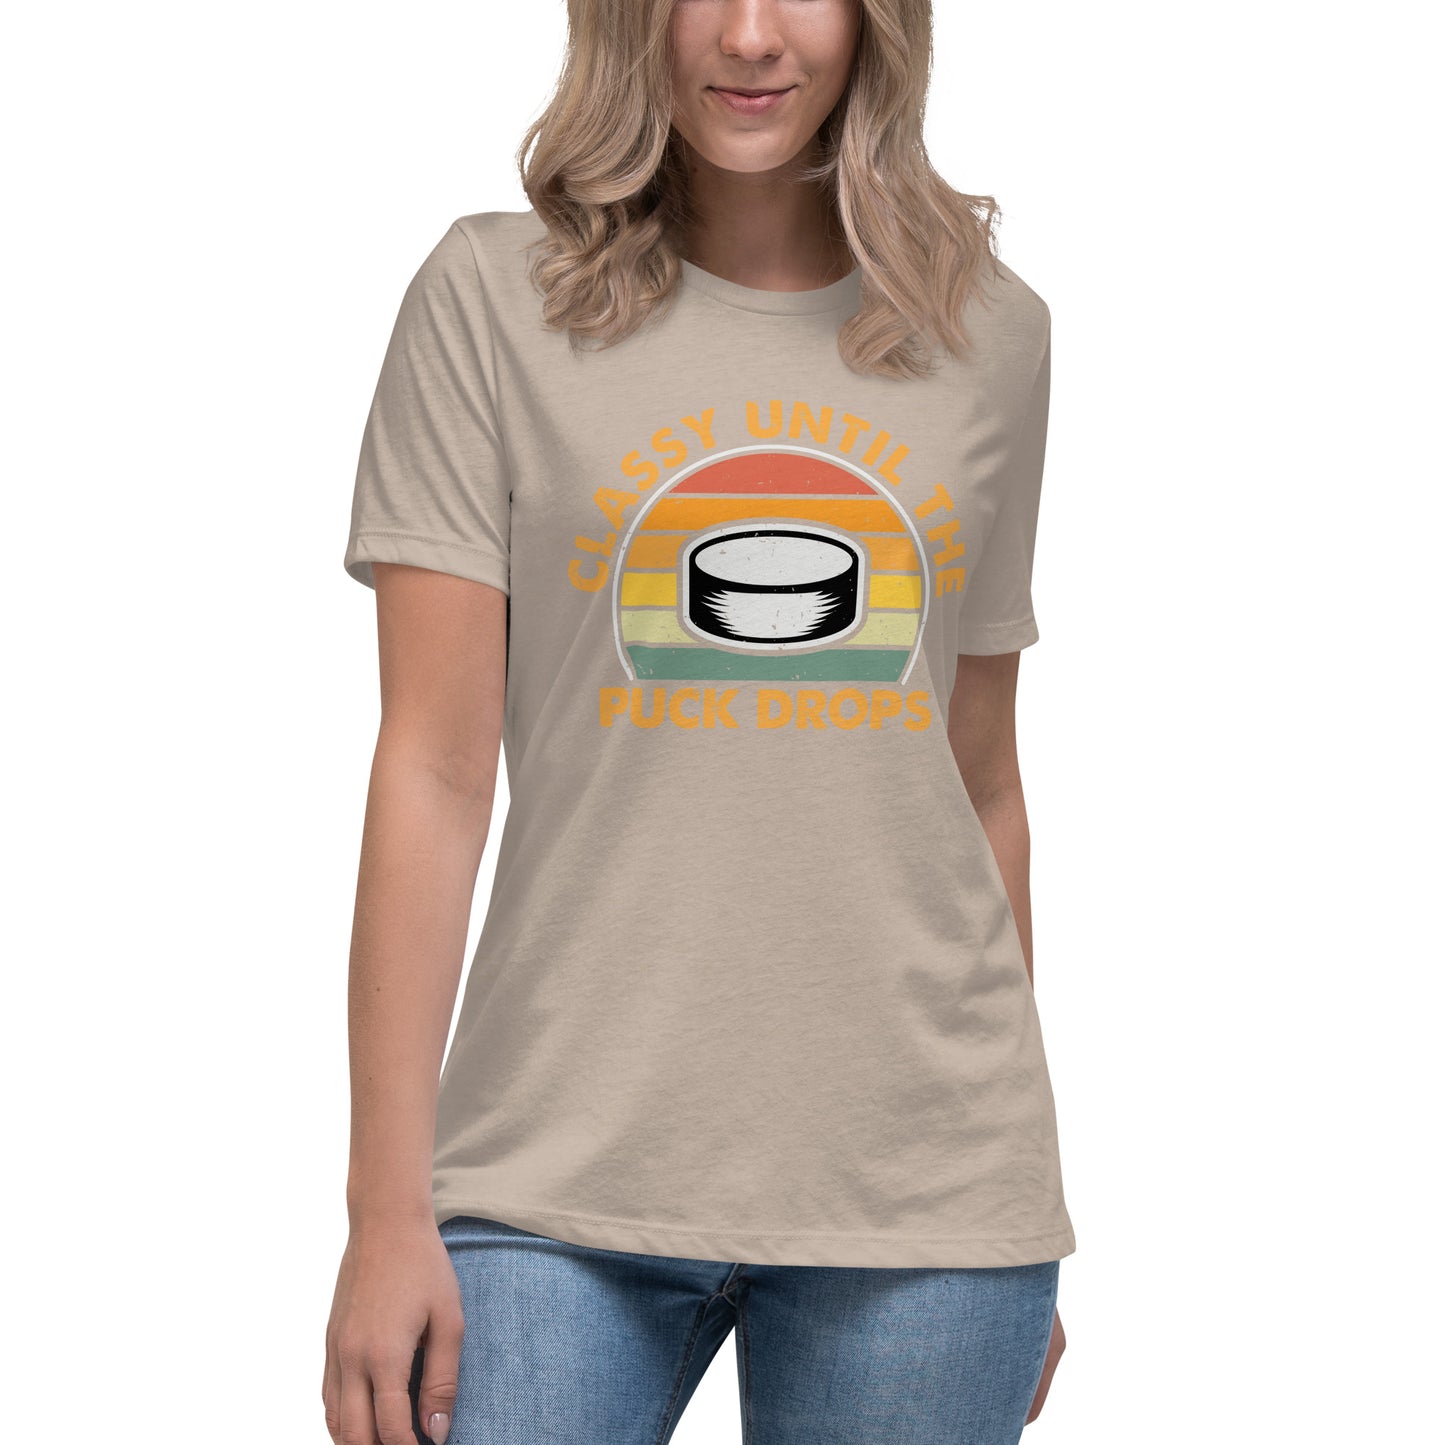 Classy Until The Puck Women's Relaxed T-Shirt